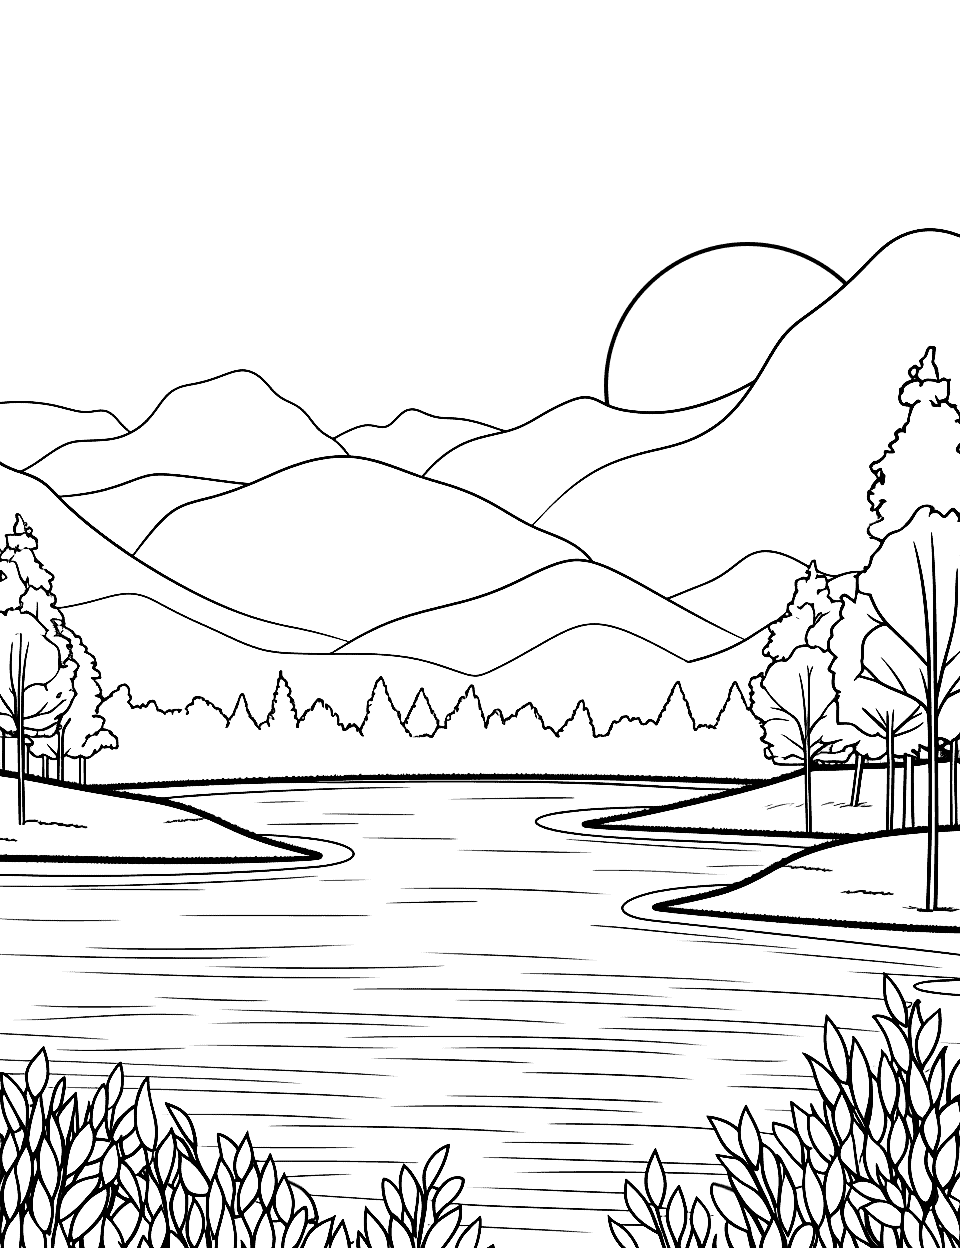 Calm Lake at Dawn Nature Coloring Page - A still lake surrounded by trees.